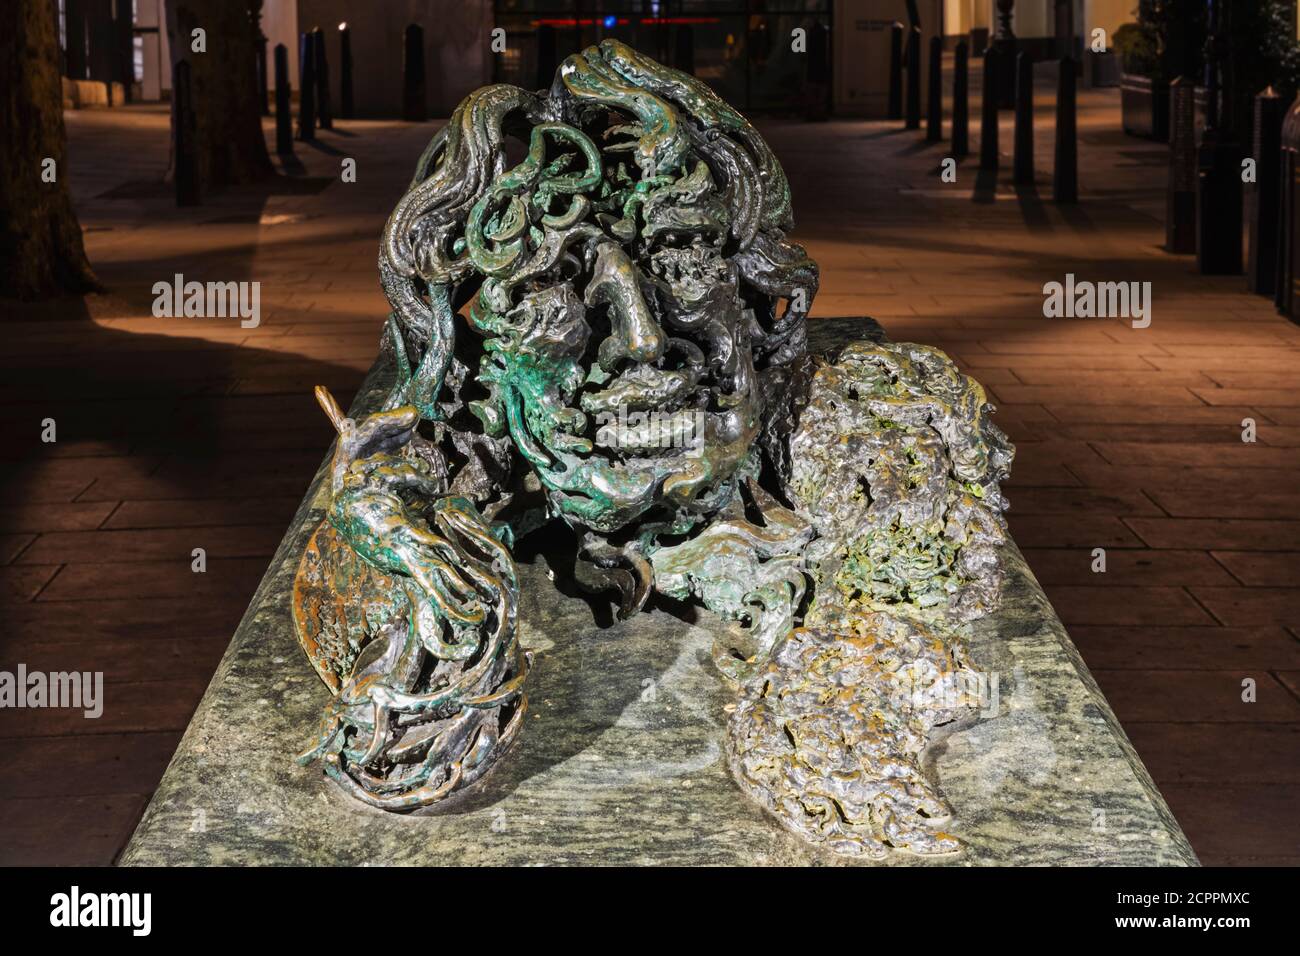 England, London, The Strand, Statue of Oscar Wilde by Maggi Hambling titled 'A Conversation with Oscar Wilde' Stock Photo